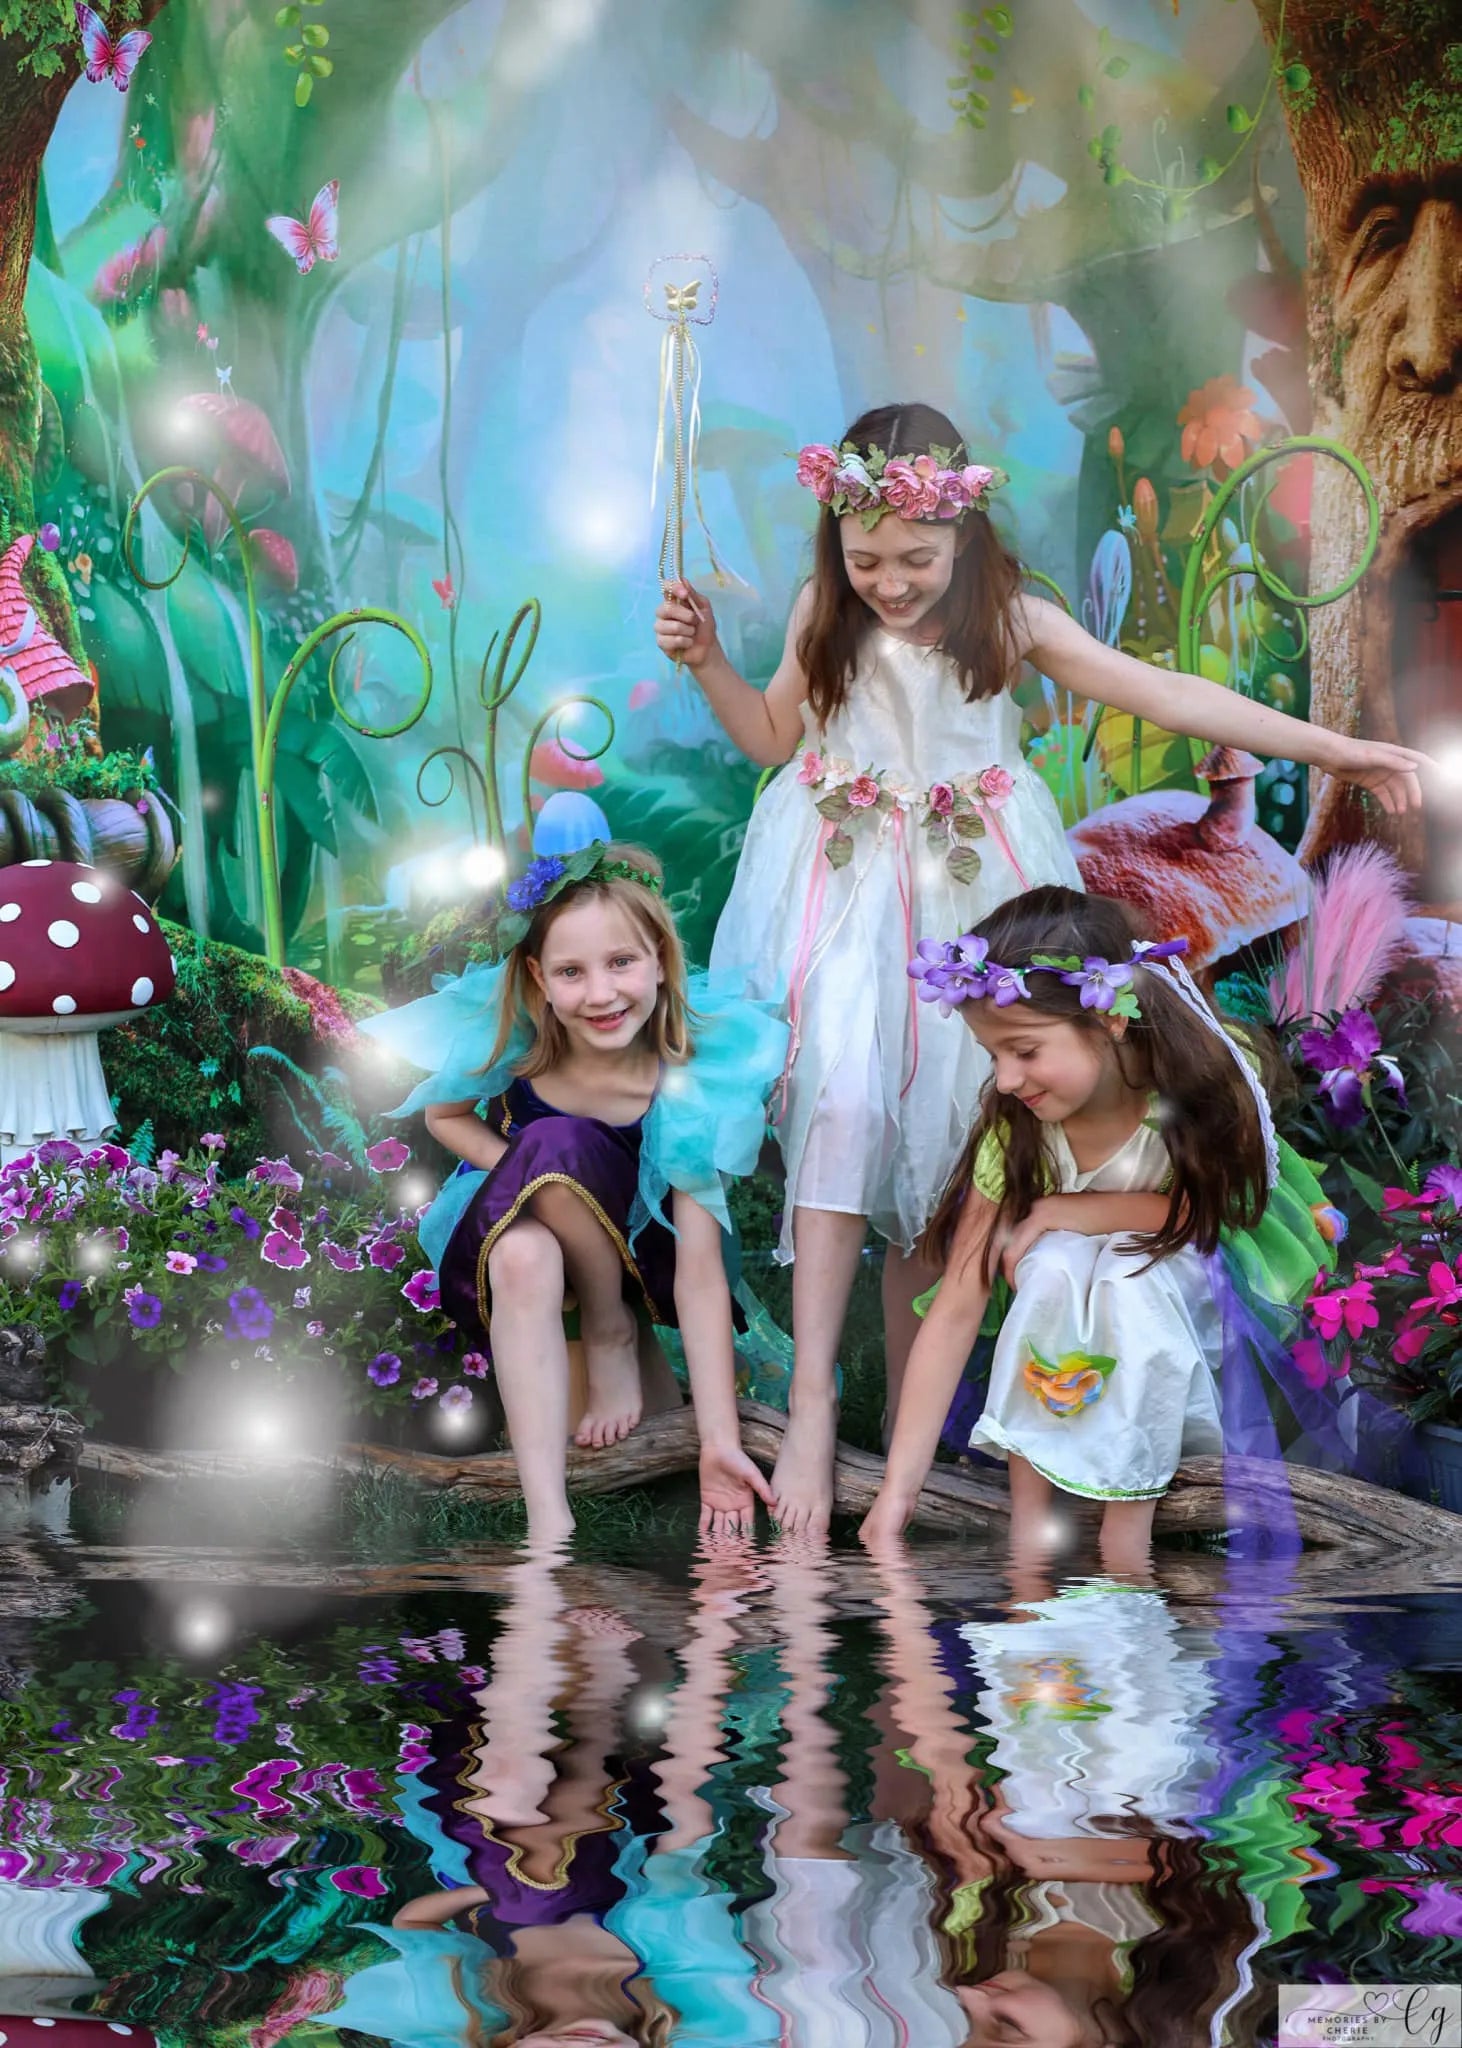 Kate Magic Forest Fantasy Jungle Flower Grass Backdrop Designed by Chain Photography